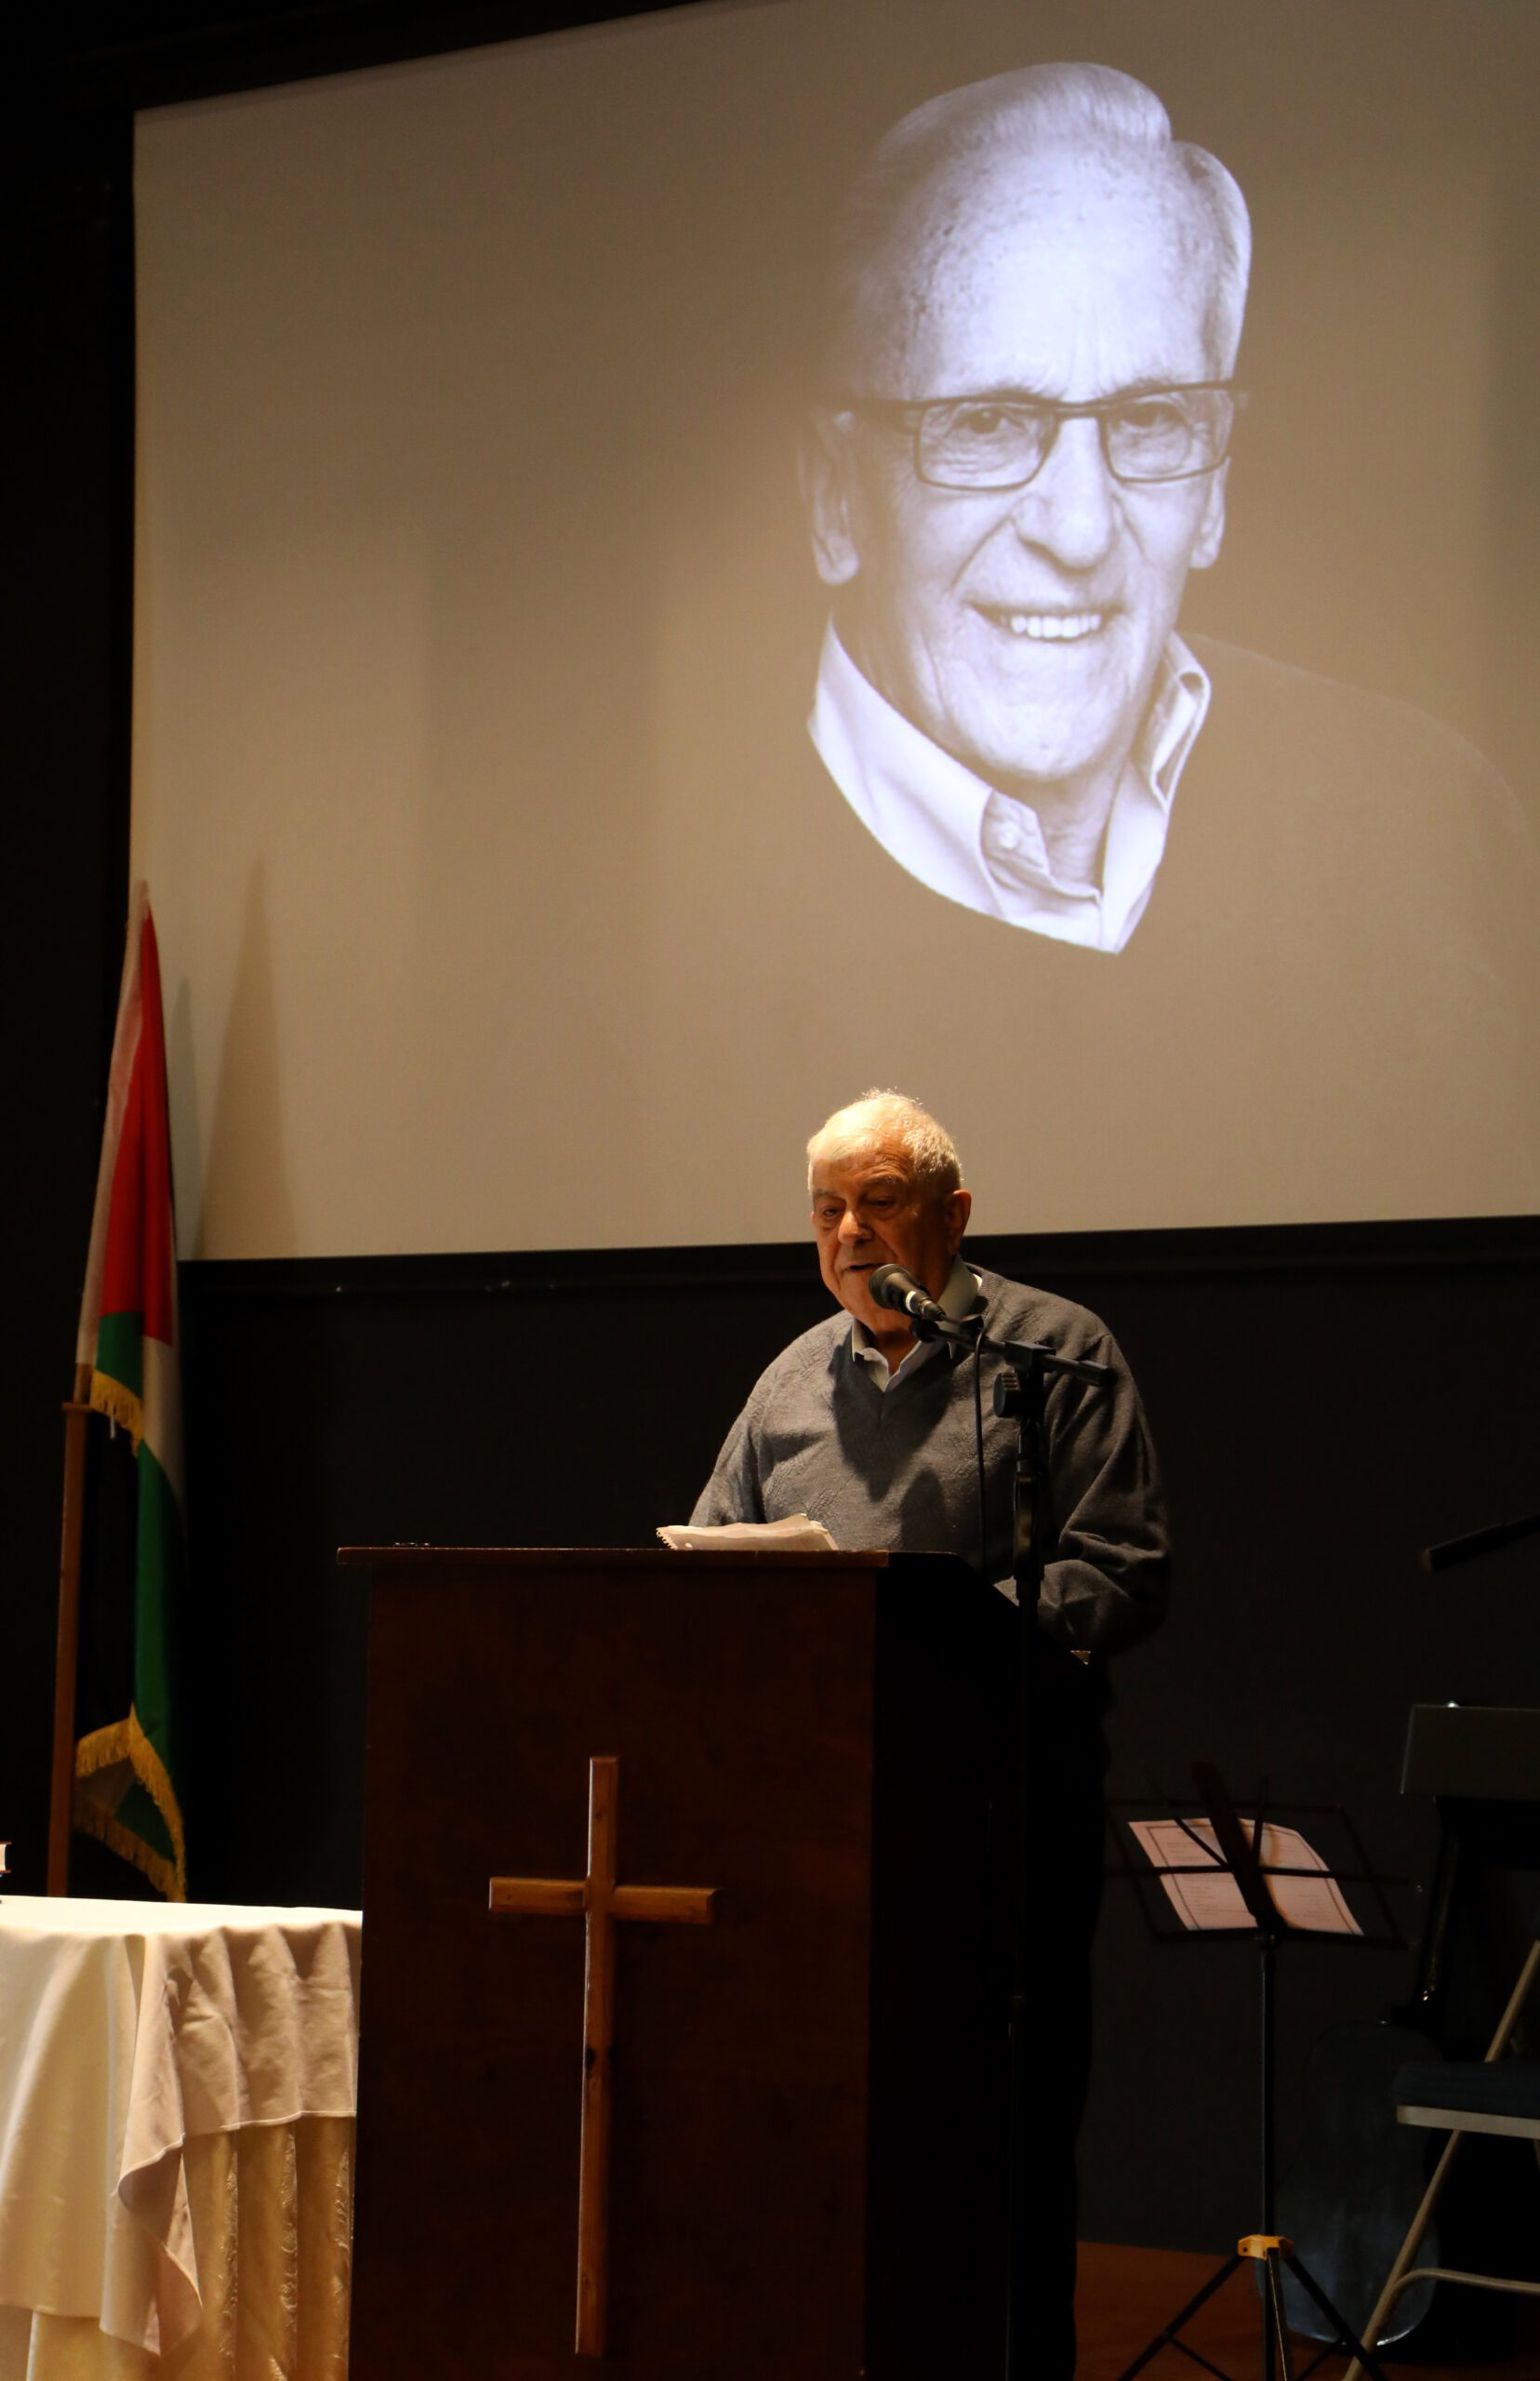 From His Home in Bethlehem, We Remember the Great Legacy of Brother Andrew.